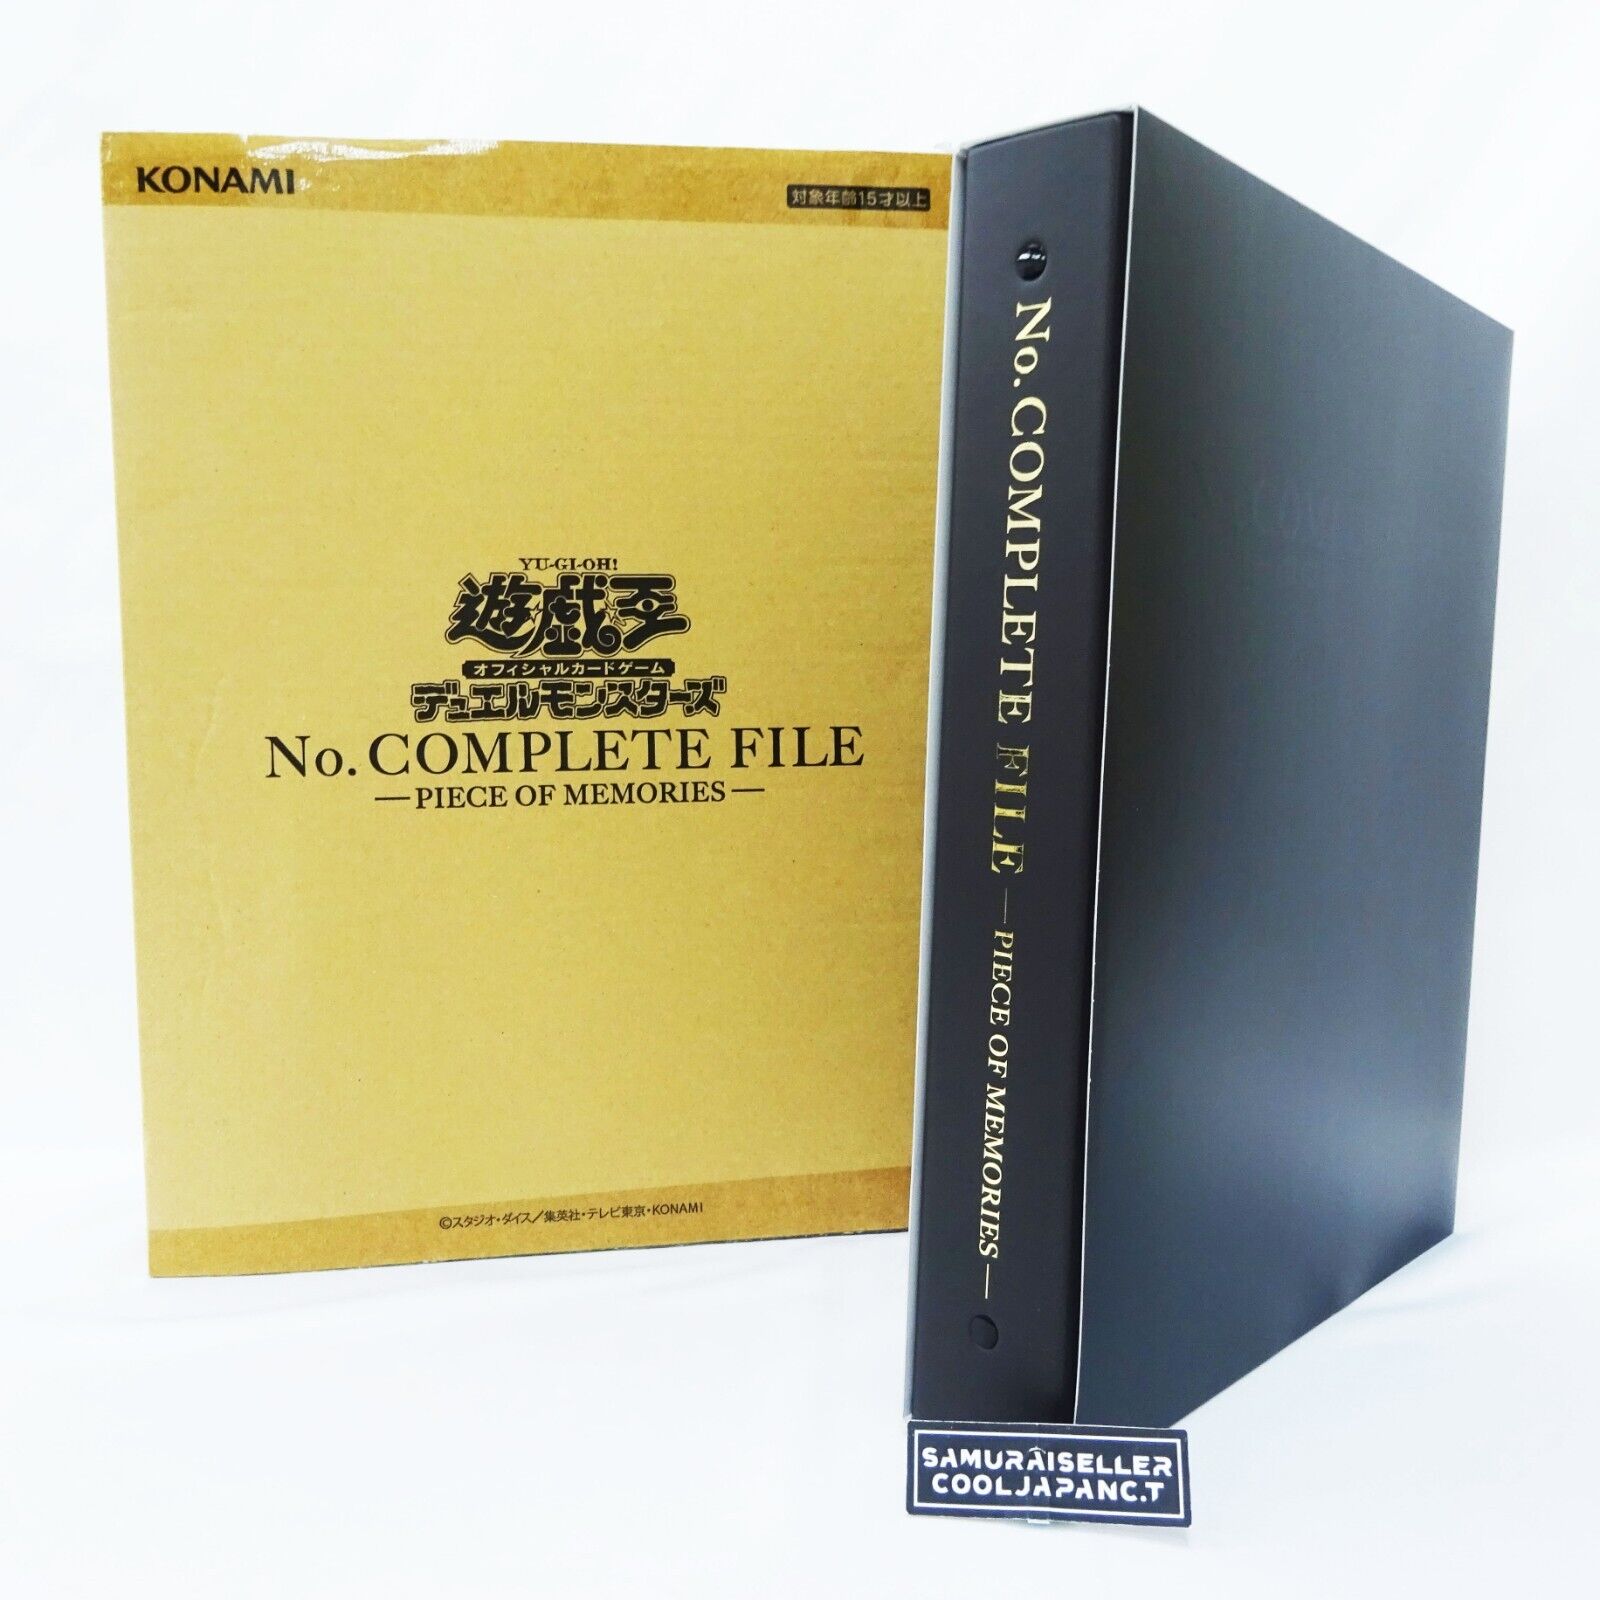 Yu-Gi-Oh Duel Monsters No. Complete File Piece of Memories First Limited Japan